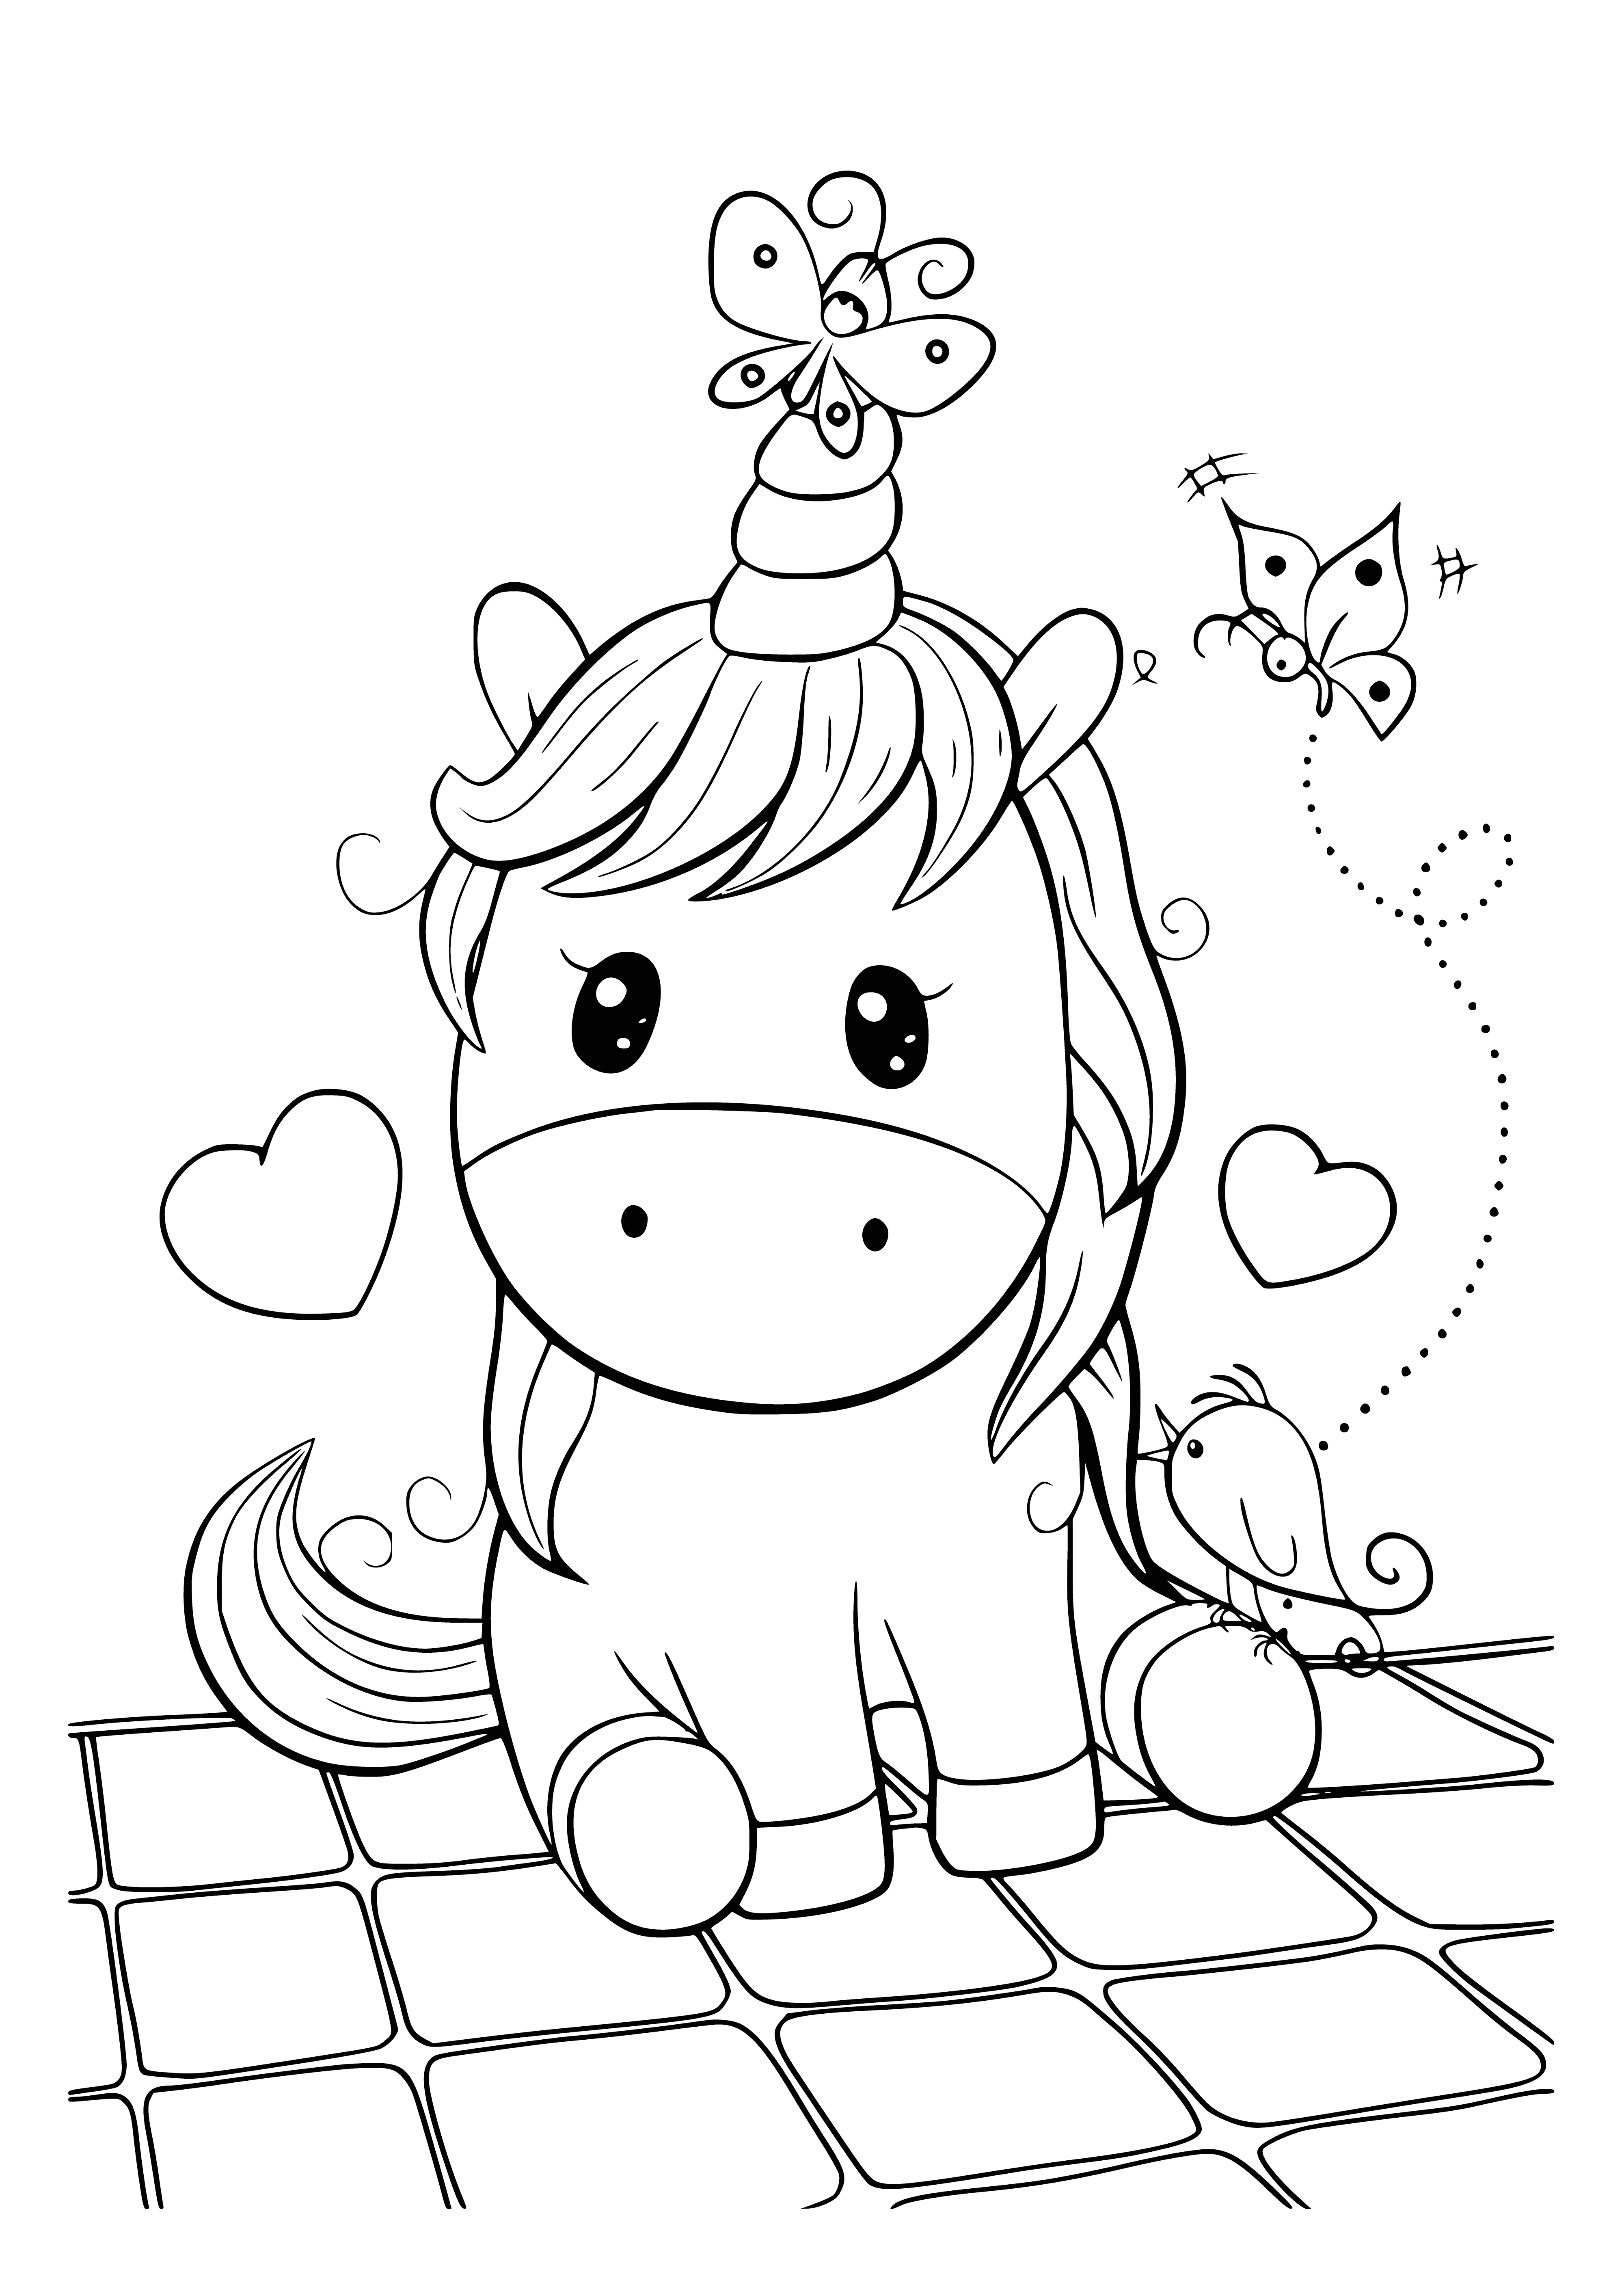 coloring page: Cute little unicorn with rainbow on its back looks at the camera with big eyes and a cute face – perfect for coloring!